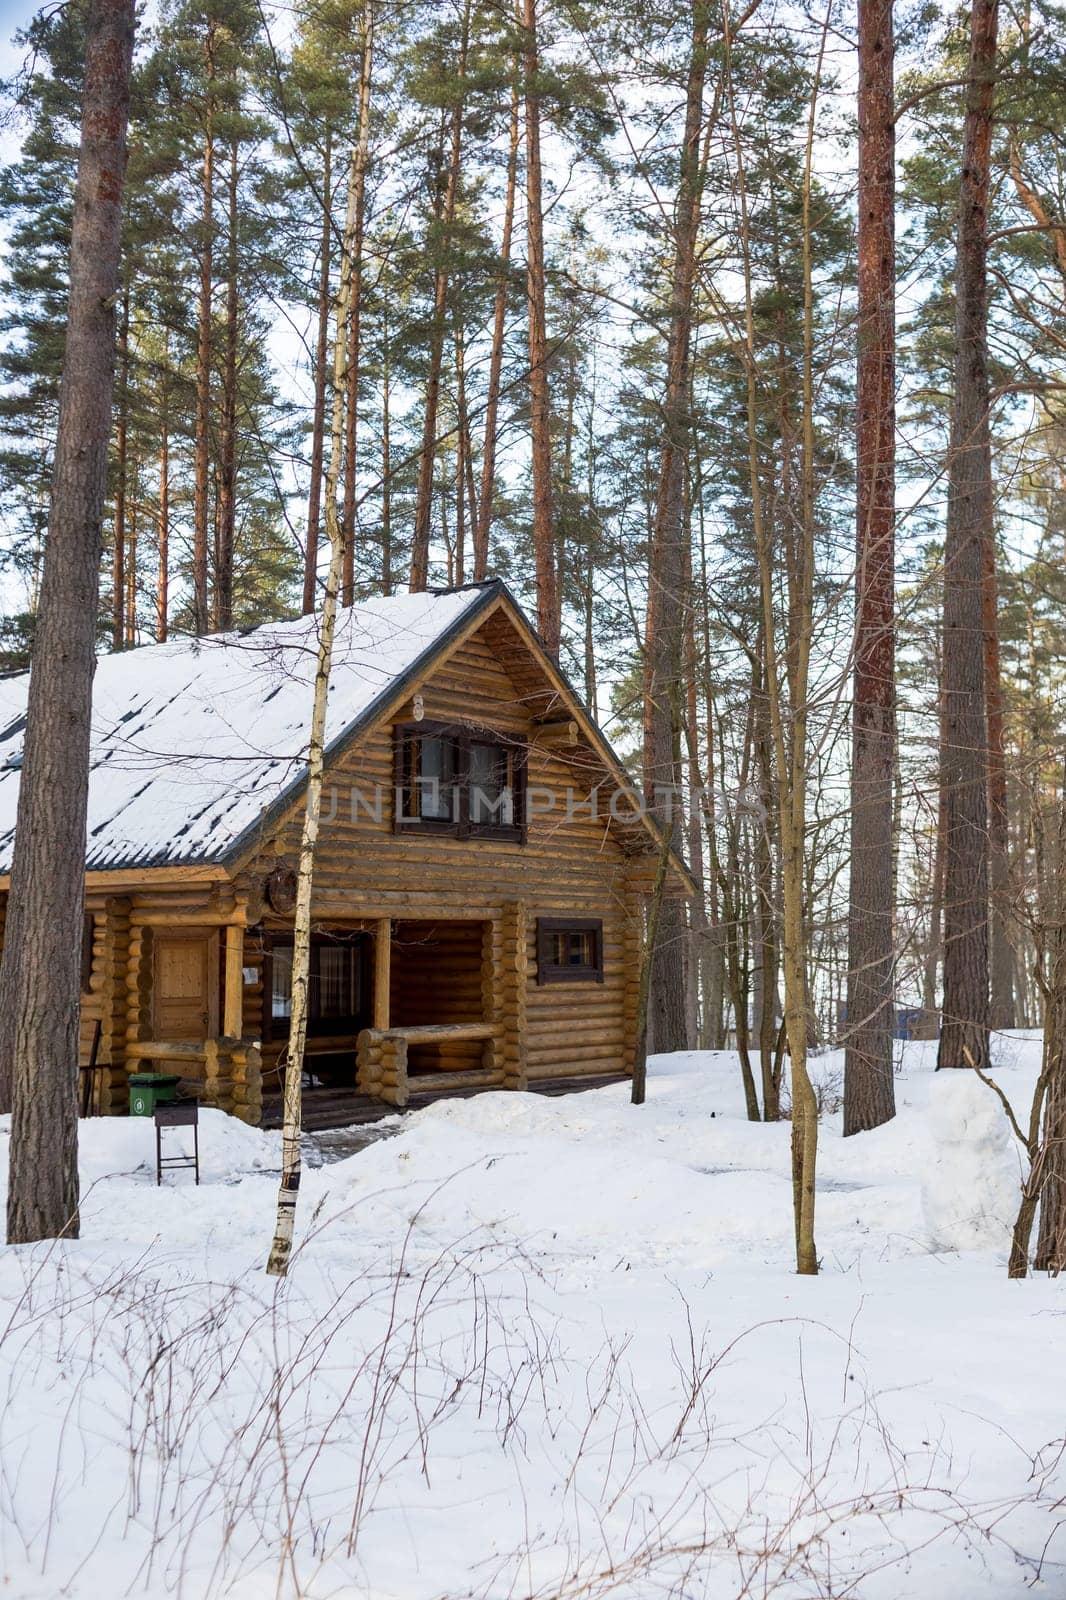 Winter's Tale. Finnish cottage in a beautiful snow forest.wooden country house cottage in winter pine forest,the roof is covered with snow,Vacation home.Northern nature by YuliaYaspe1979